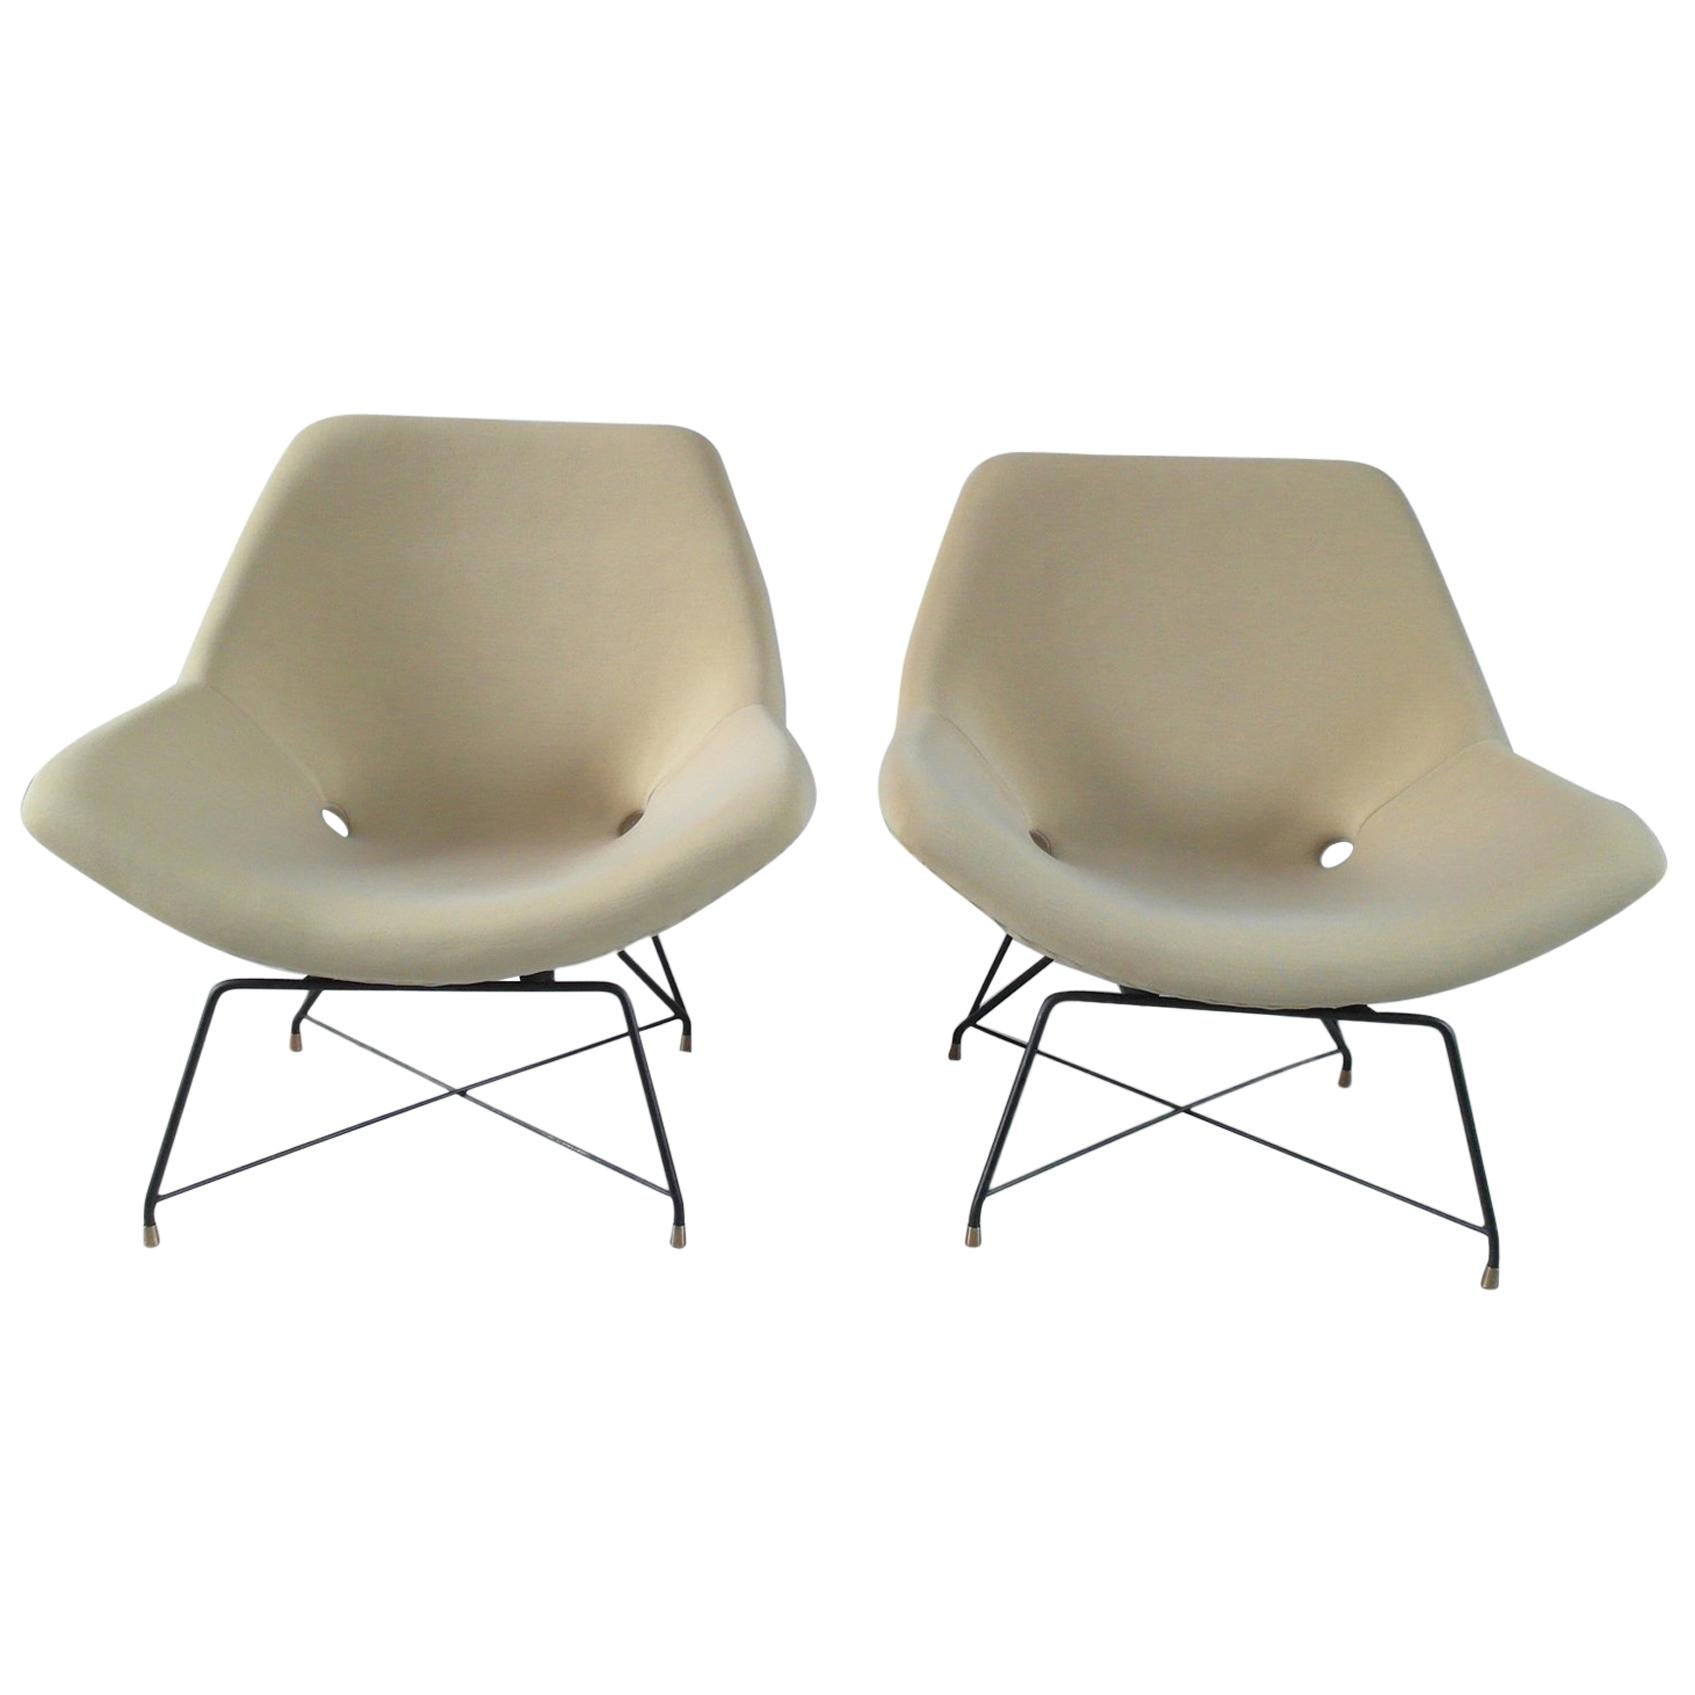 Sculptural Pair of Lounge Chairs by Augusto Bozzi for Saporiti, Italy, 1954 For Sale